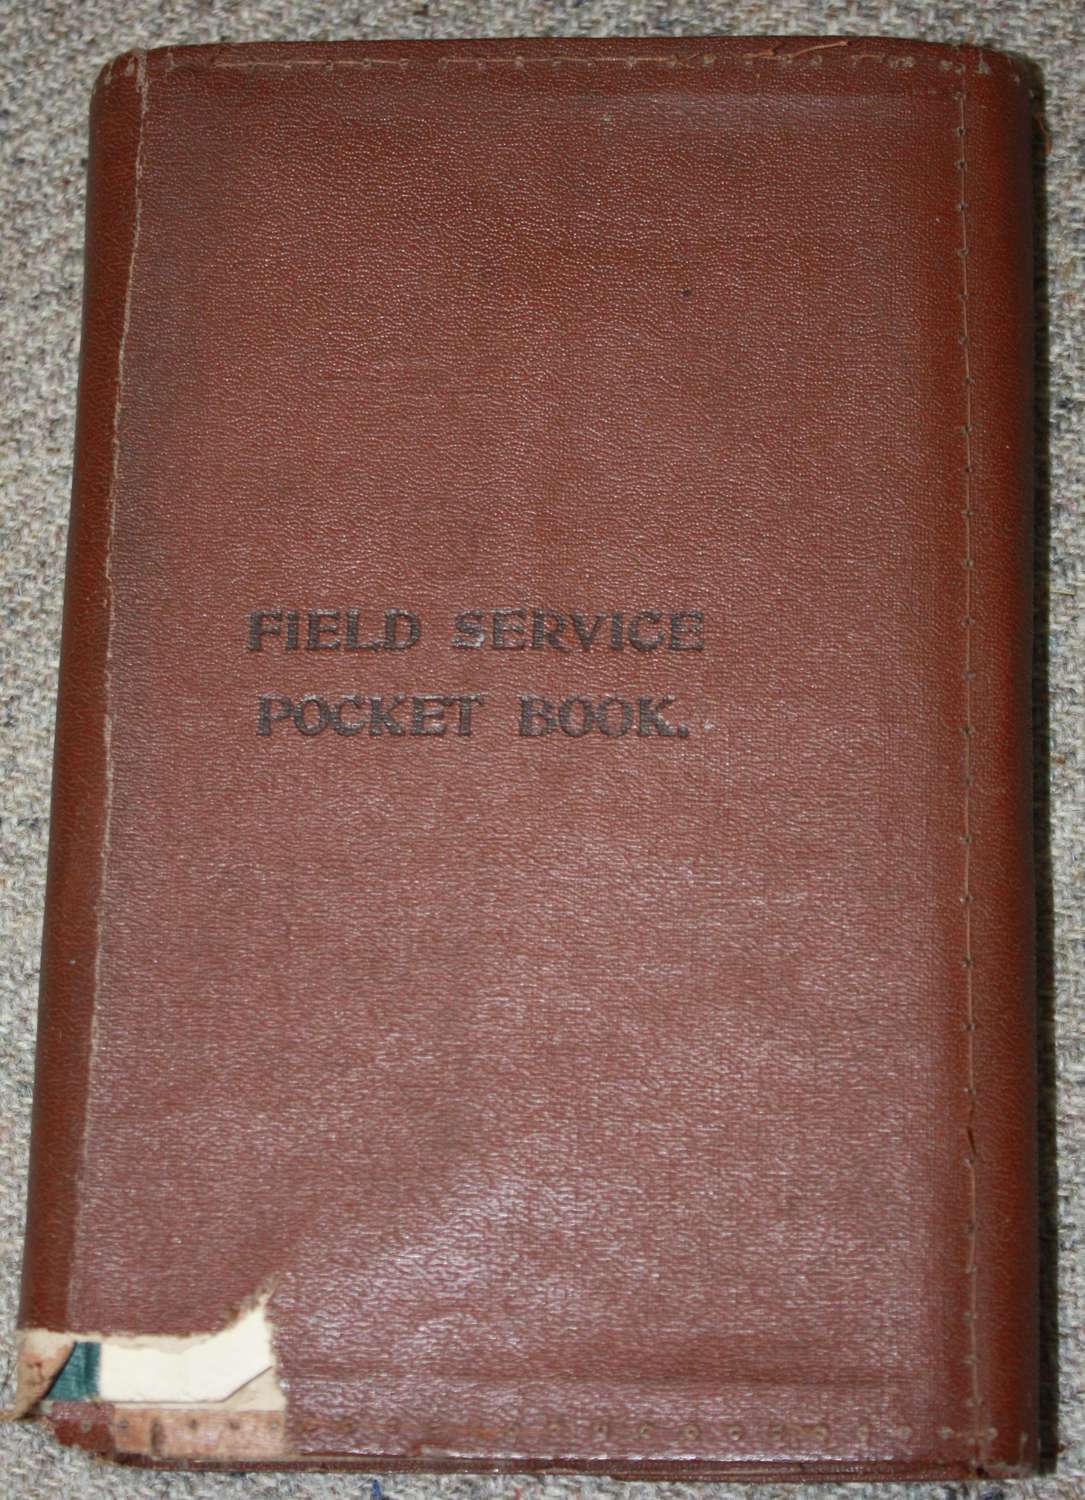 A 1916 COPY OF THE 1914 FIELD SERVICE POCKET BOOK